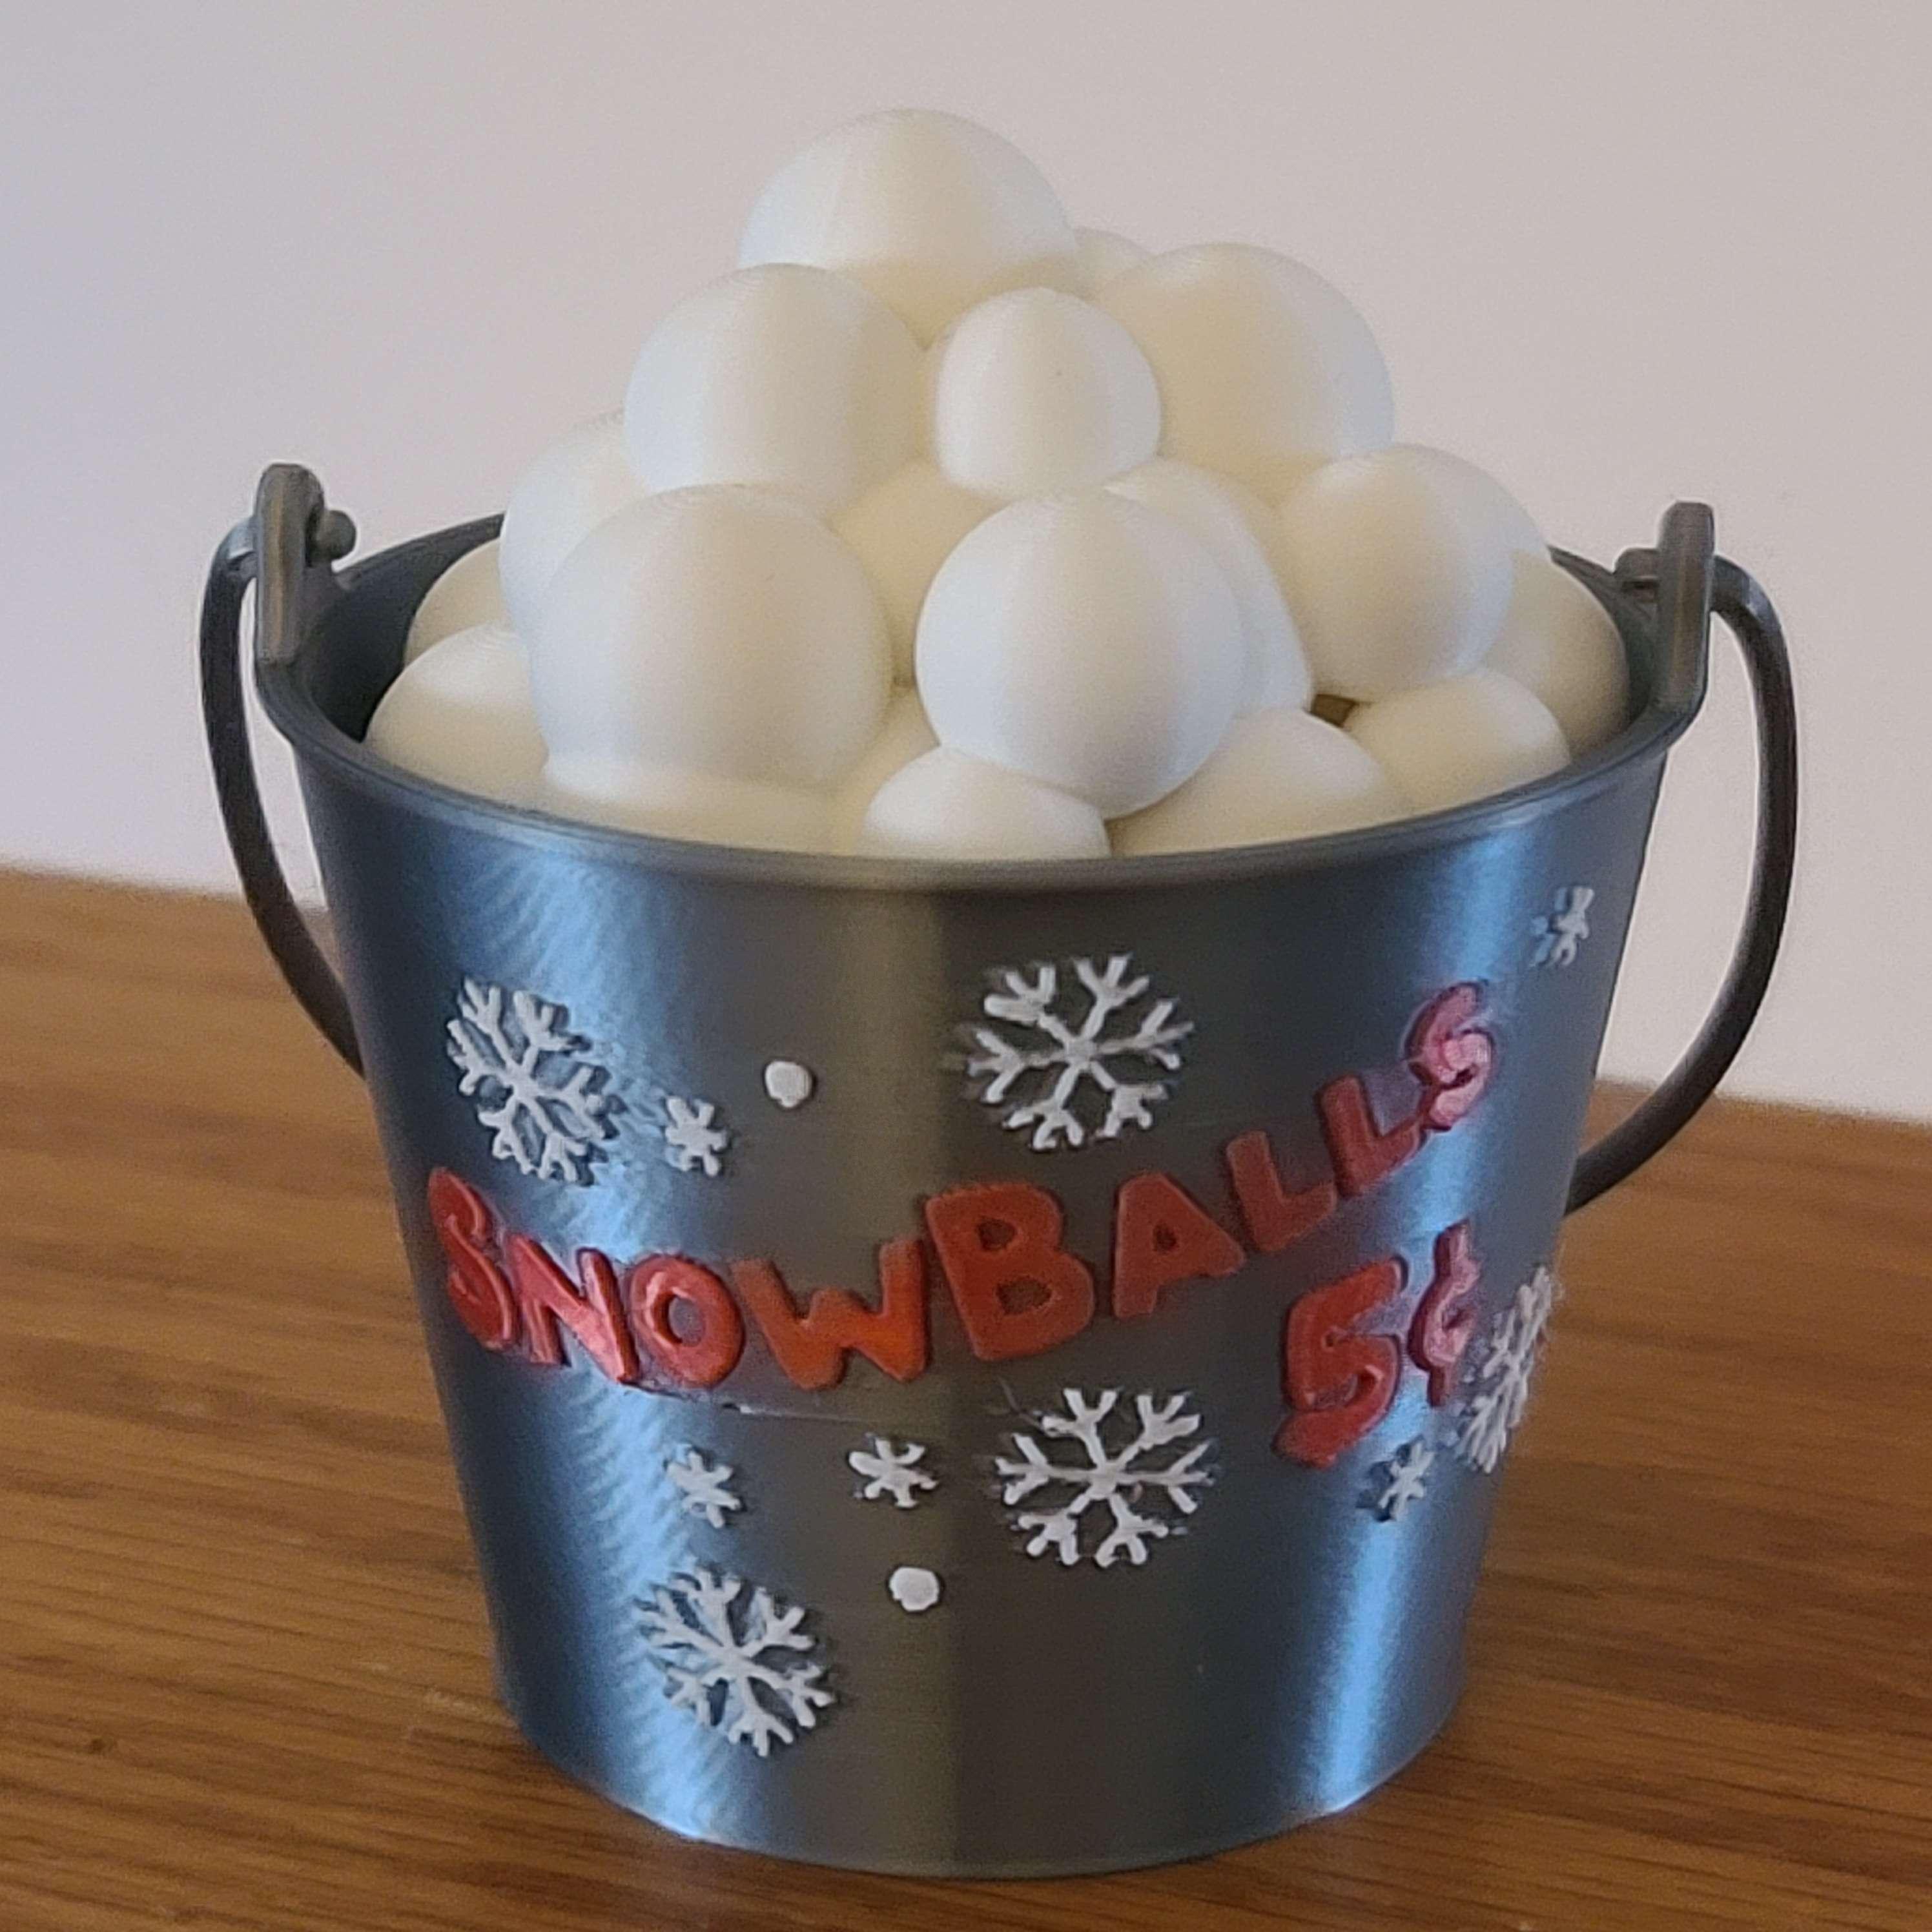 Snowball Bucket Ornament or Candy Dish - AMS Prepainted Included 3d model